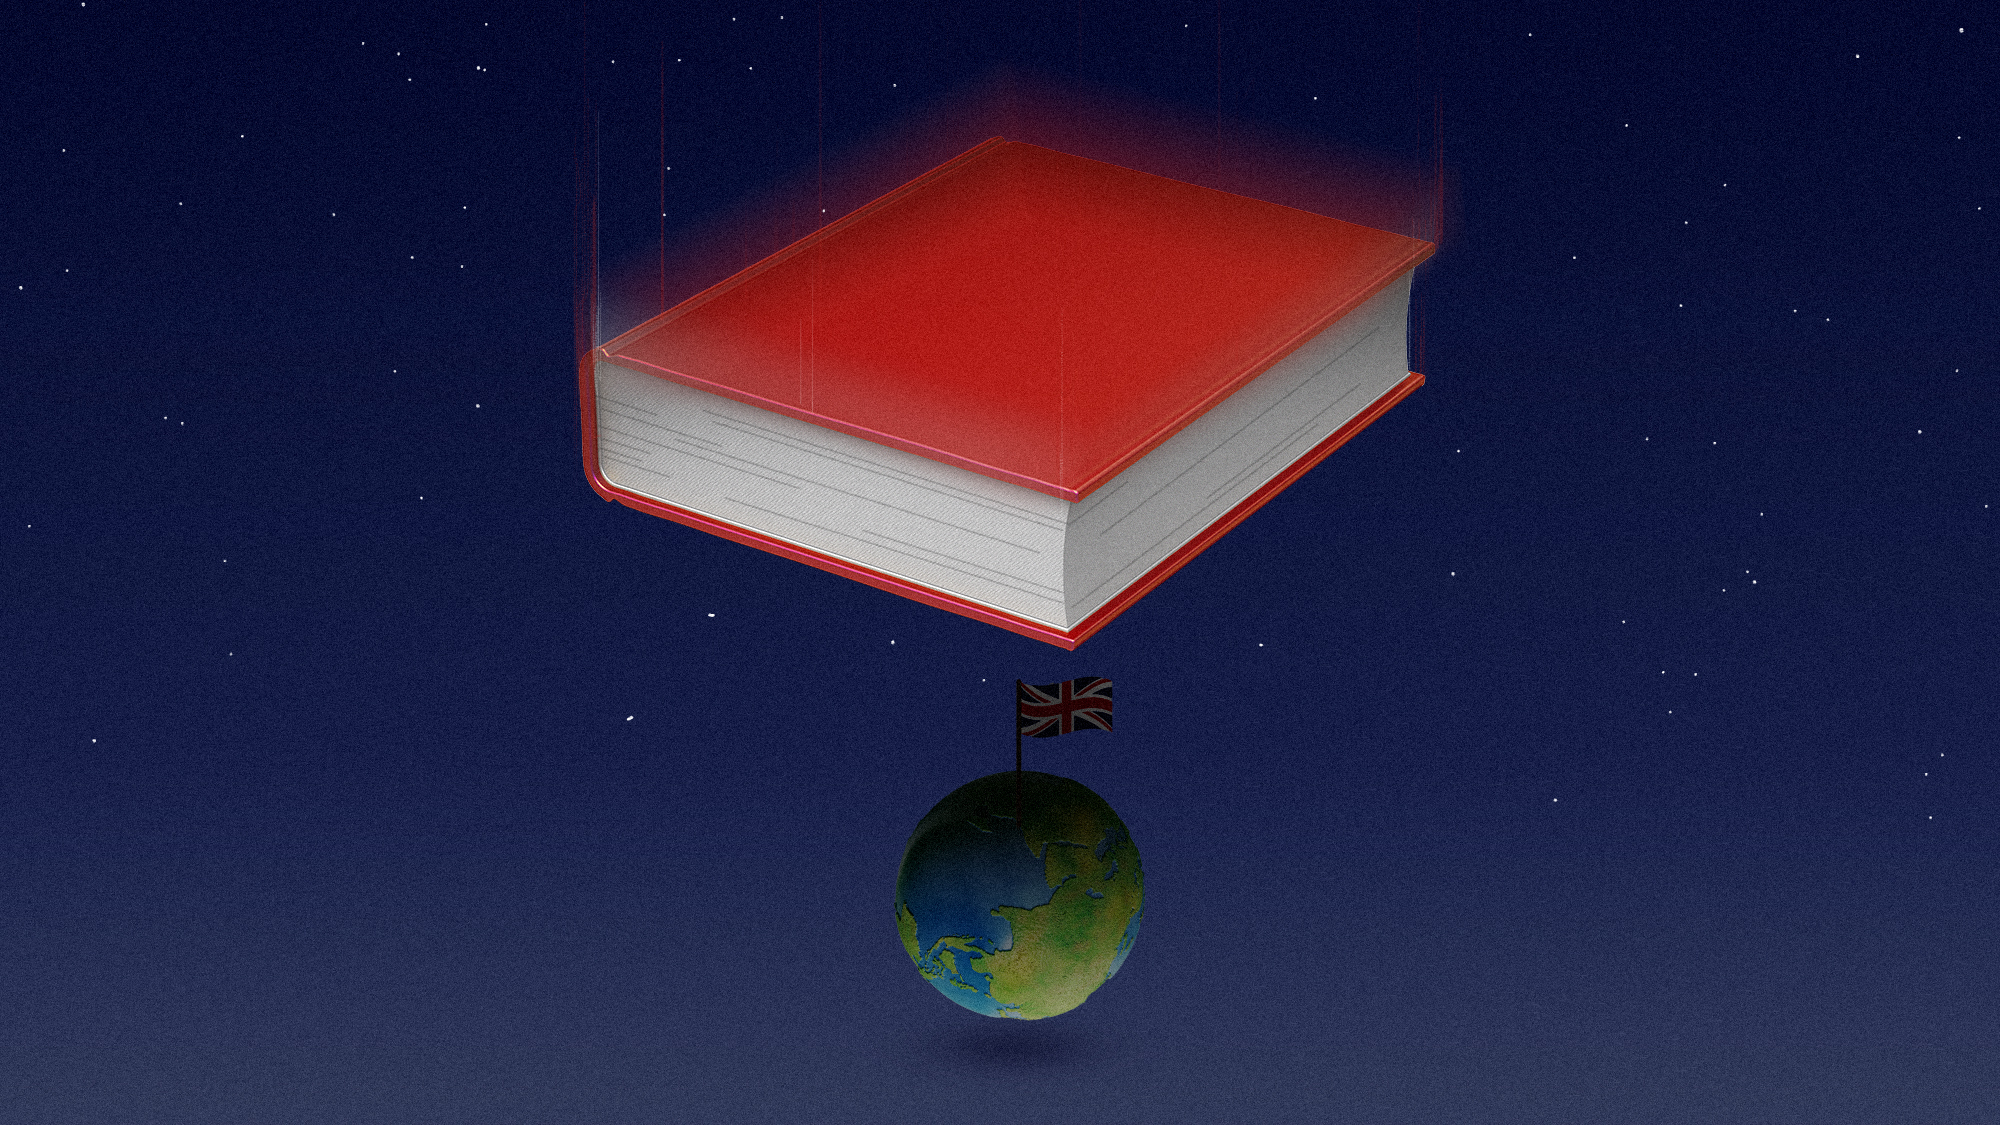 A red book floating above an illustration of the Earth with a British flag planted on it